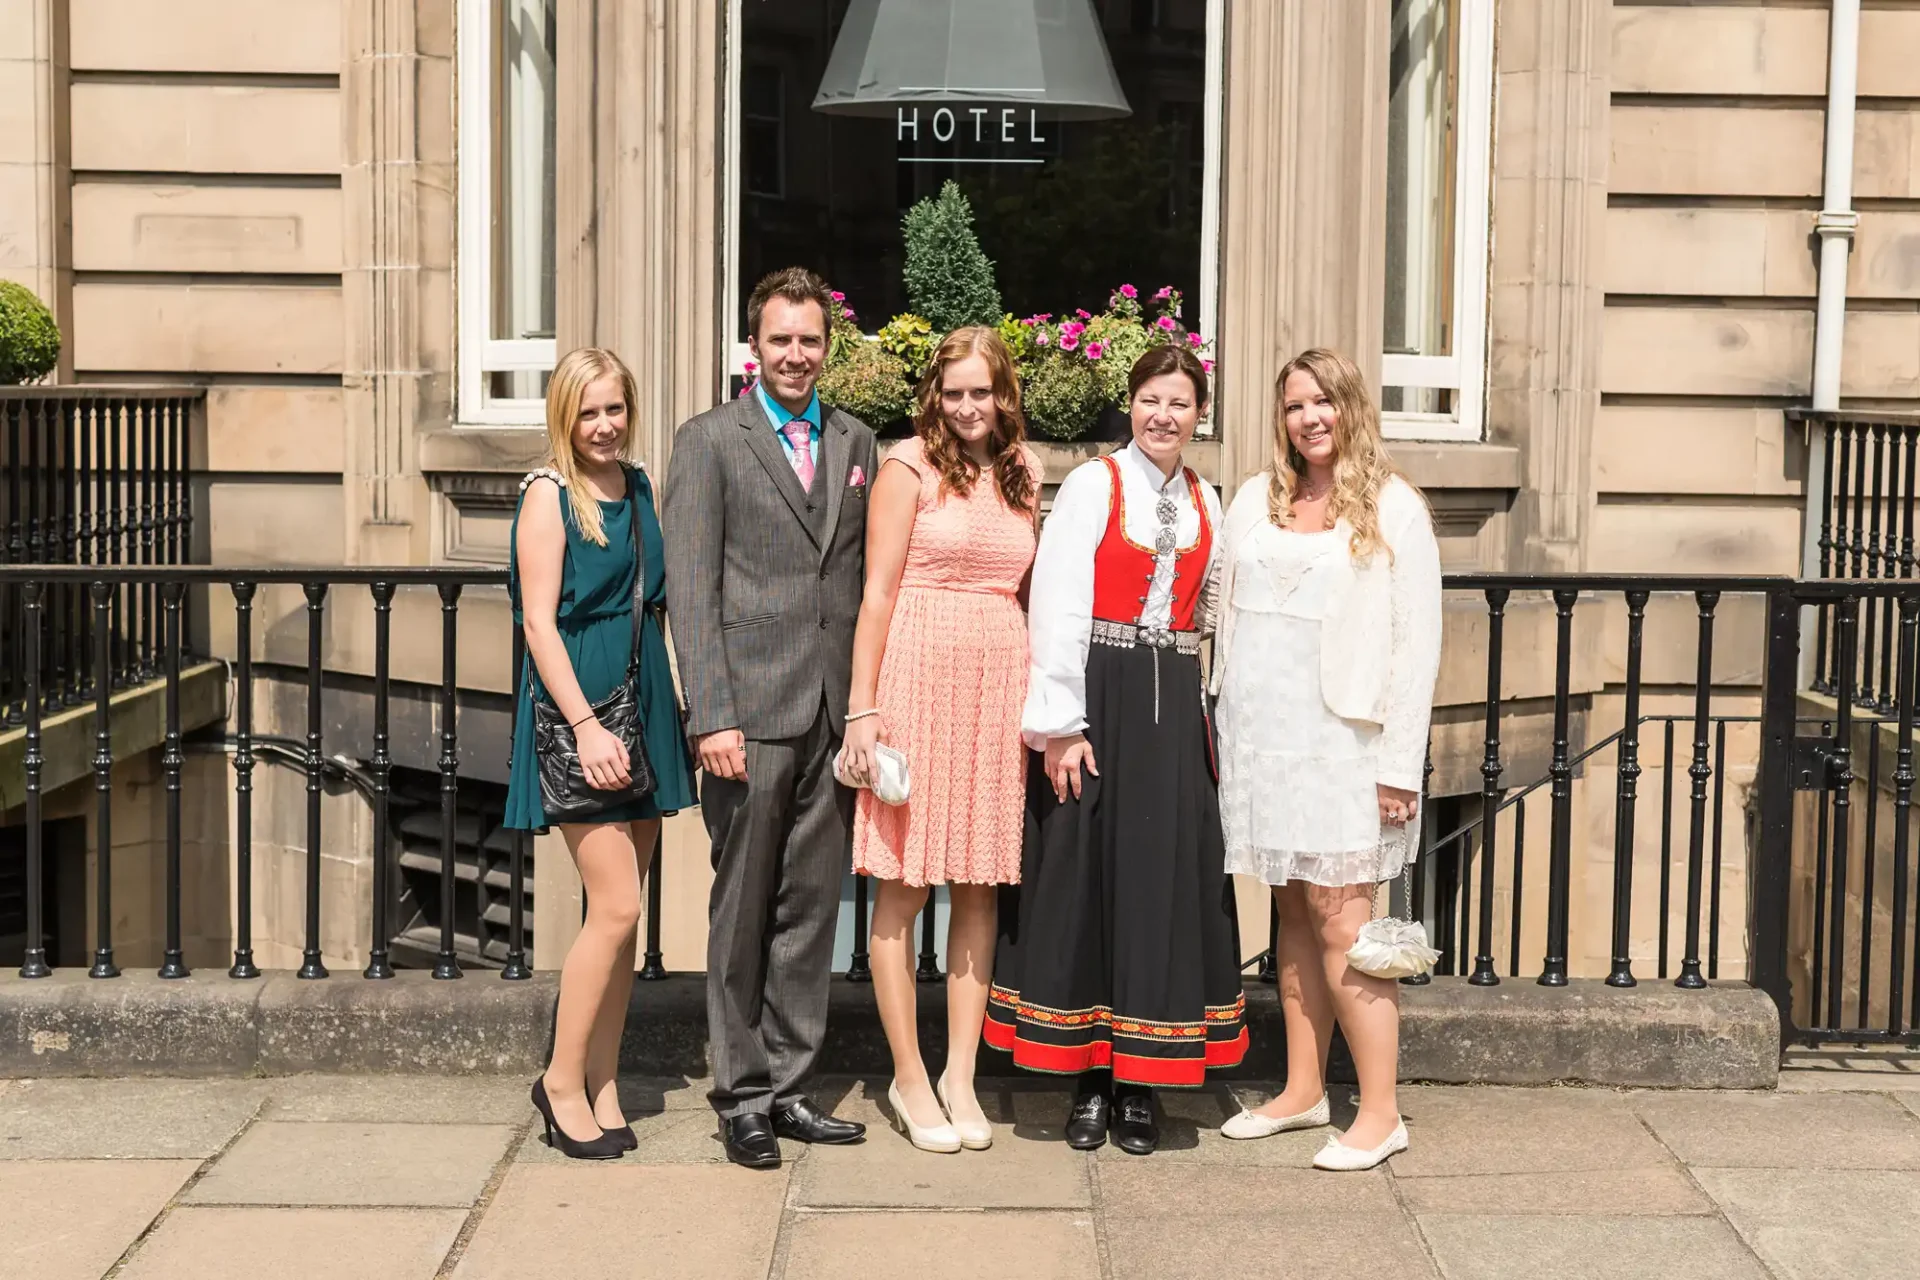 Five people posing in front of a hotel entrance, two women in traditional scandinavian dresses, one man in a suit, and two women in modern dresses.